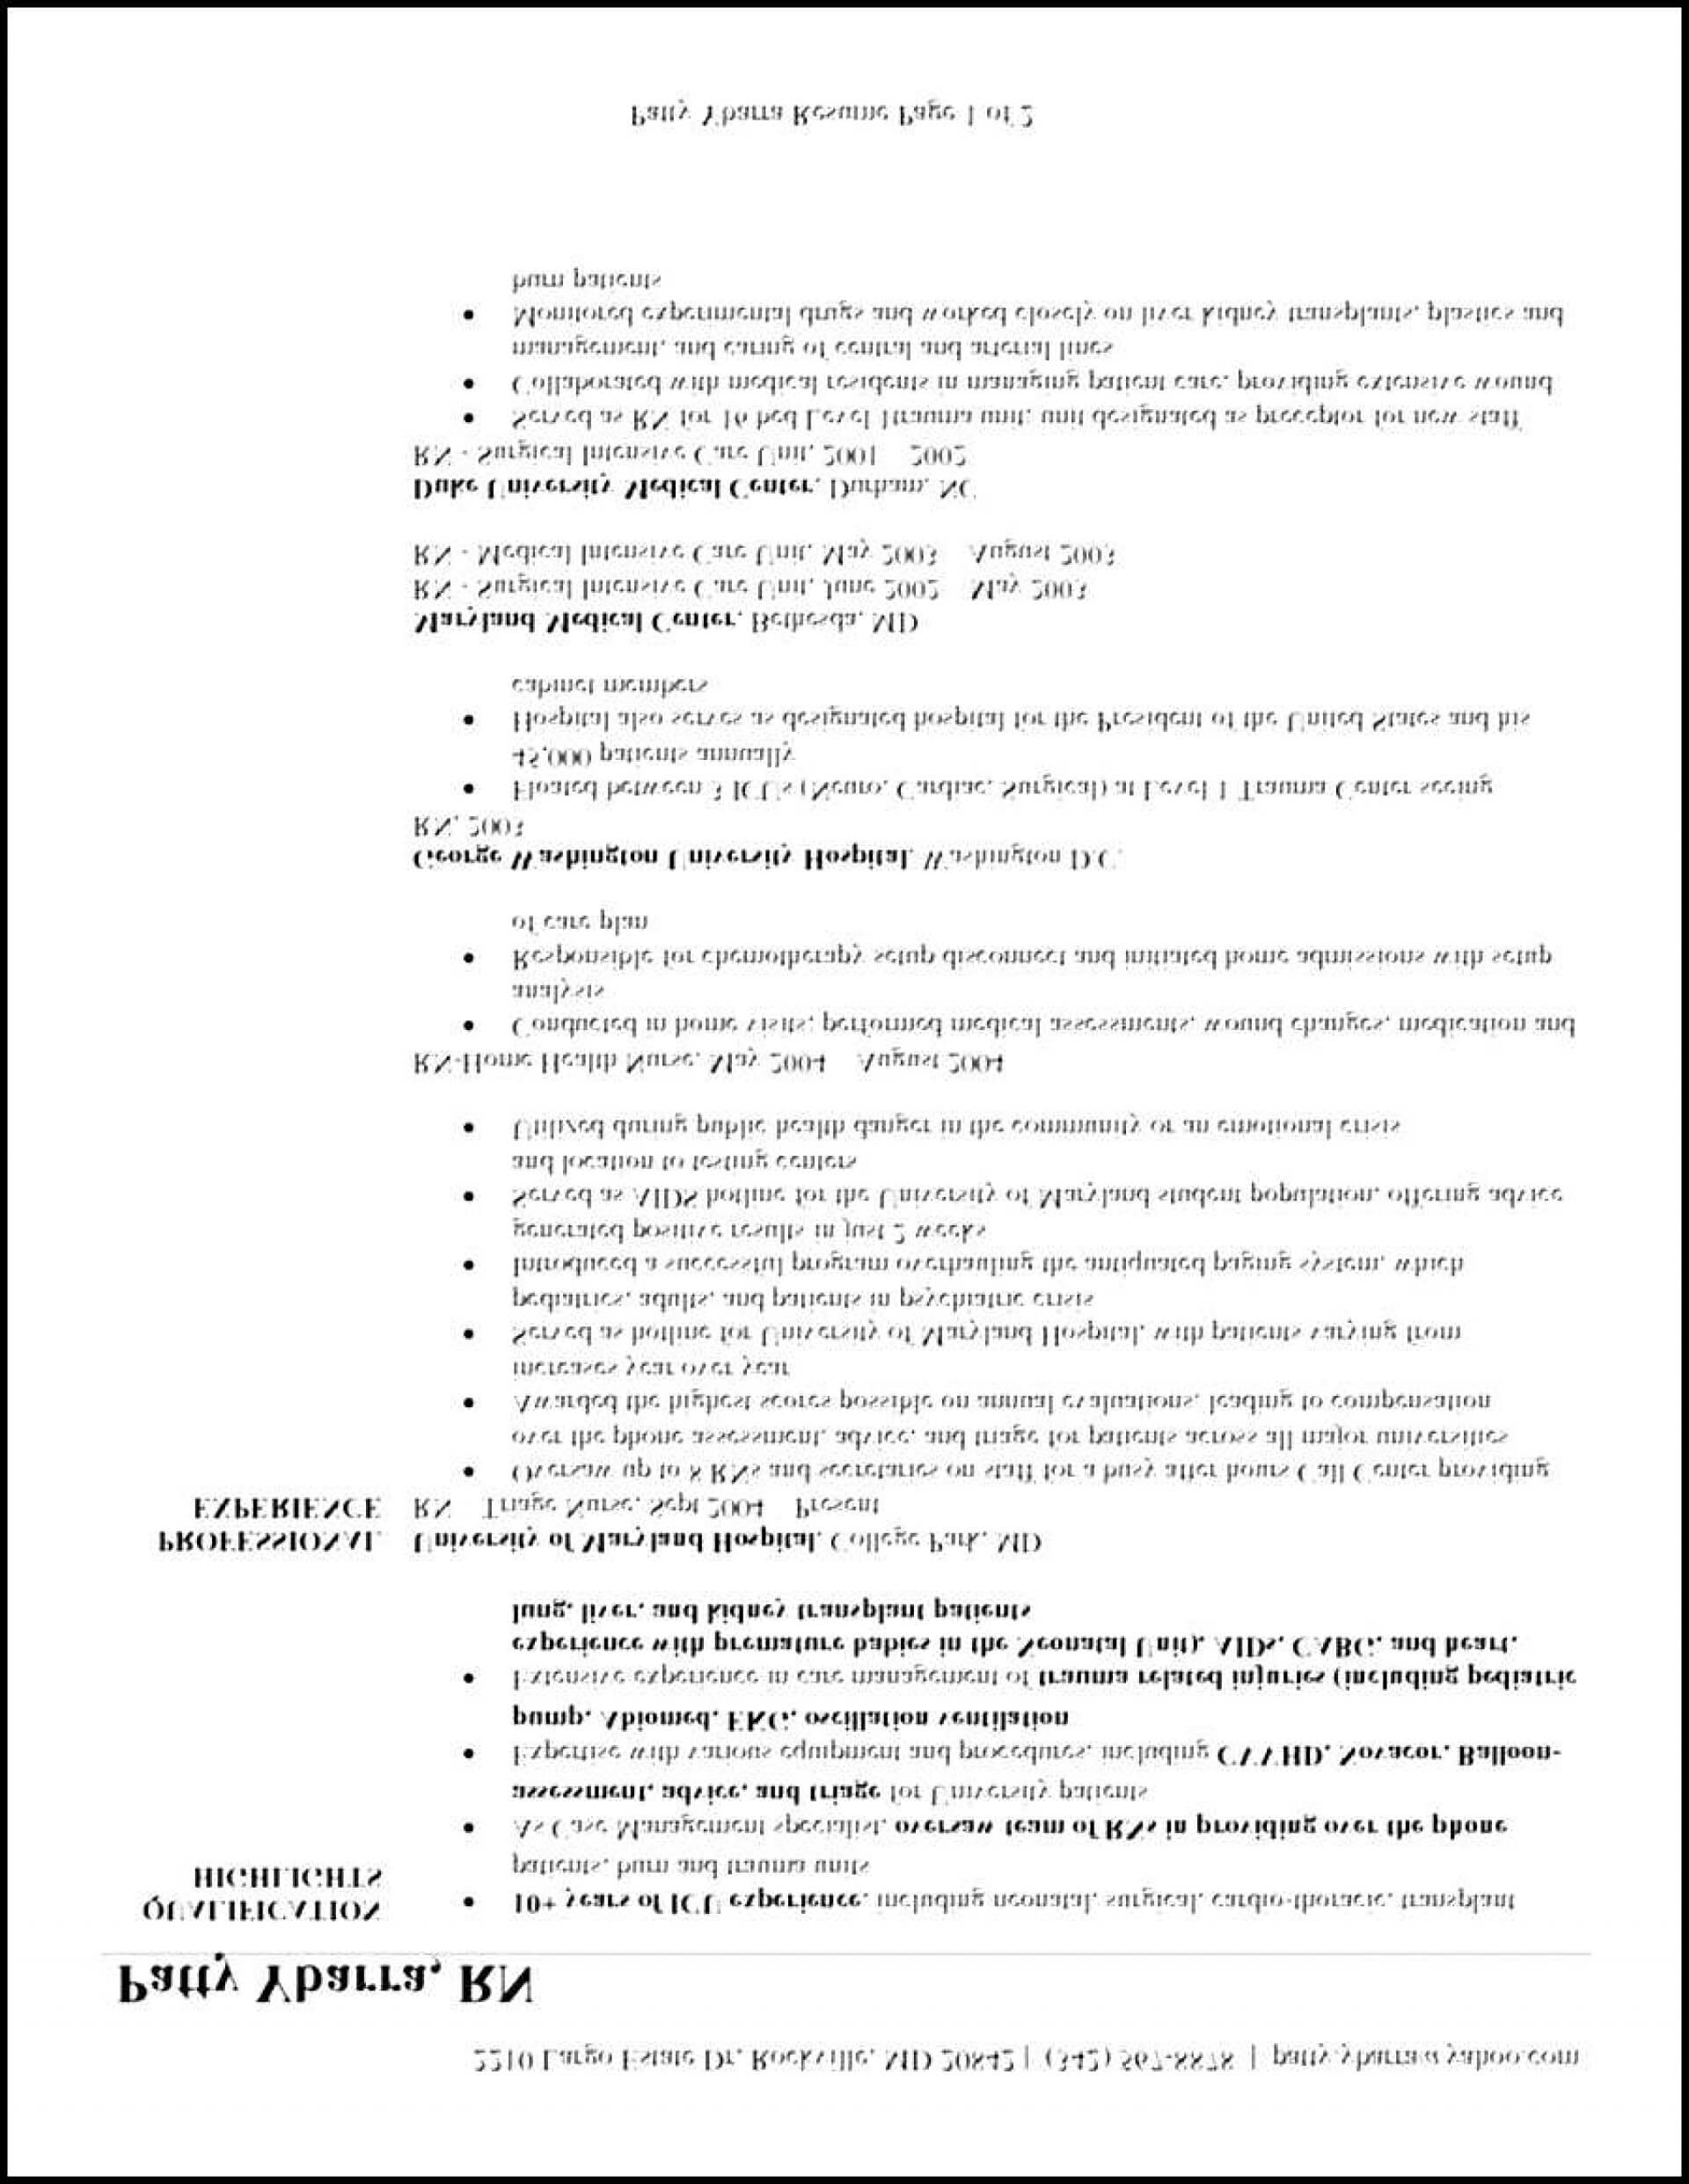 008 Www Plannerinserts Com Resume Emma Page Template Student With Scientific Paper Template Word 2010